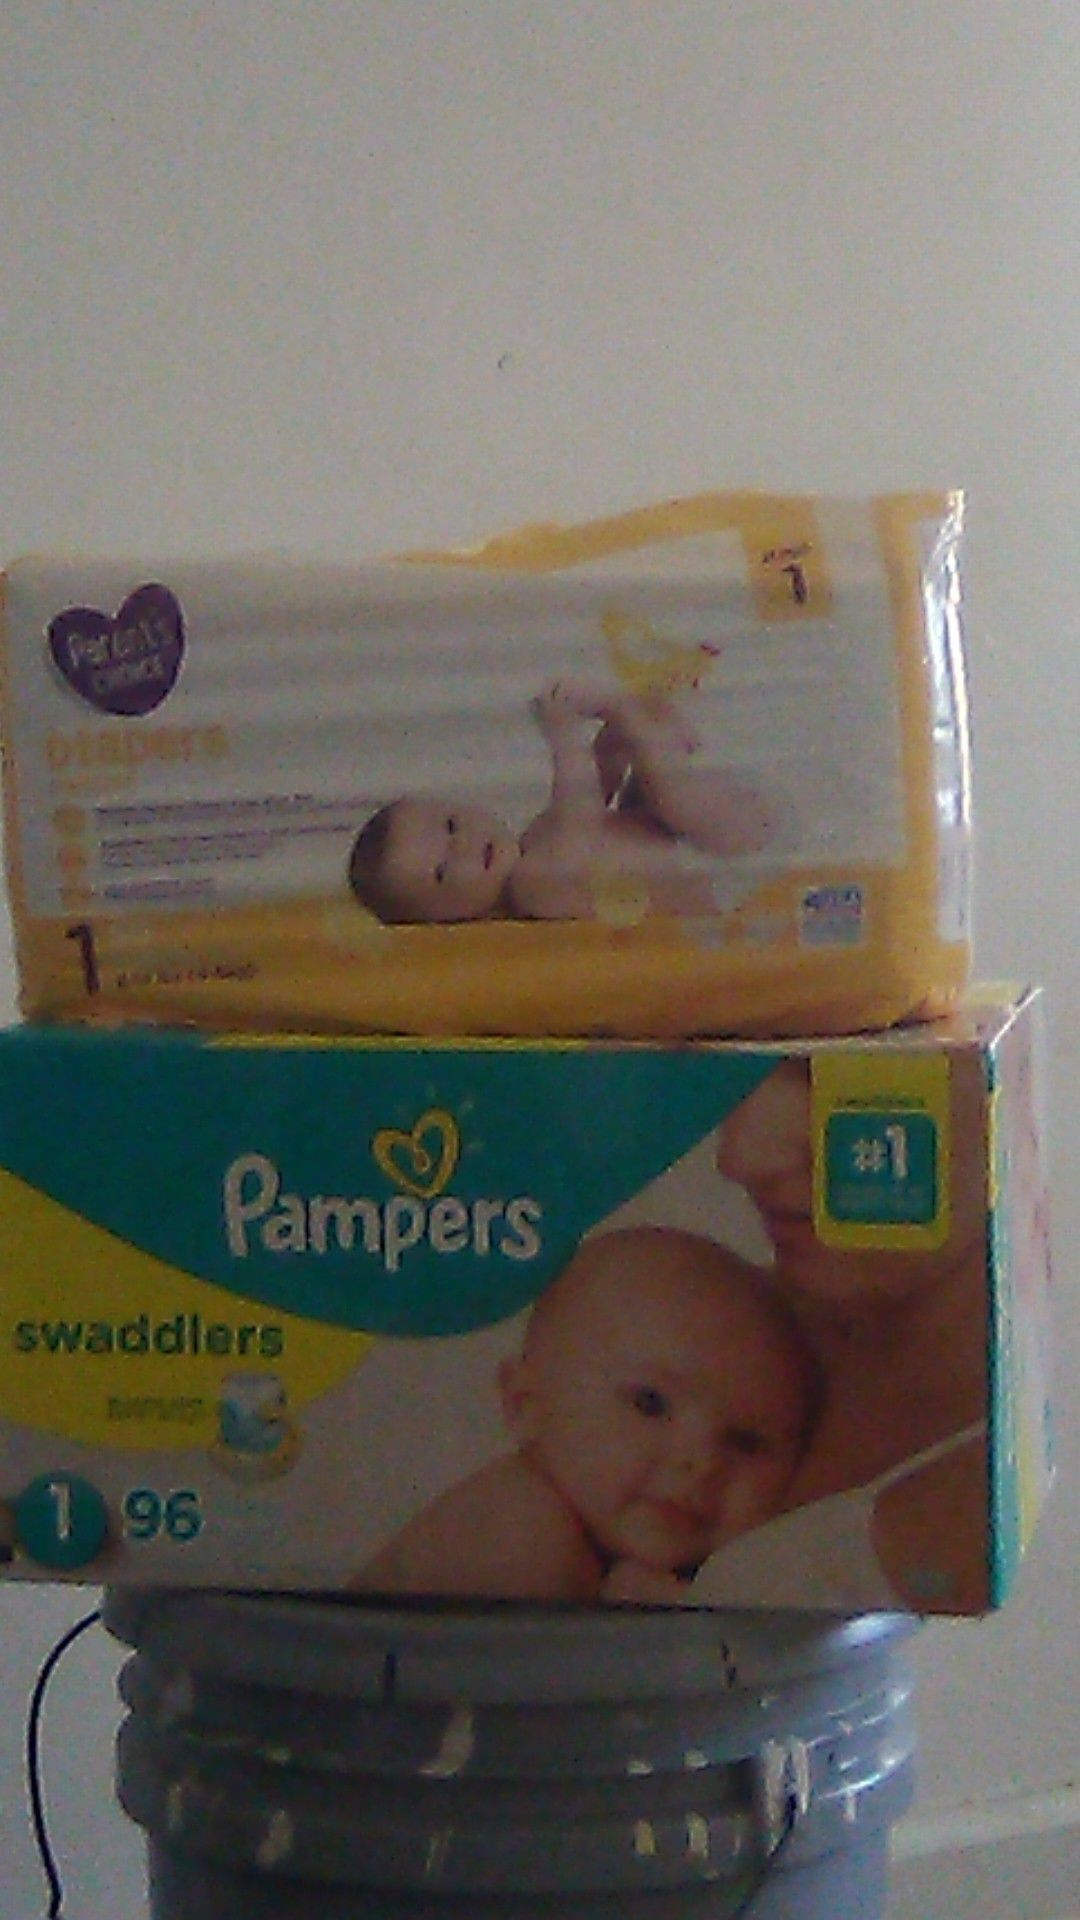 Pampers & parents choice